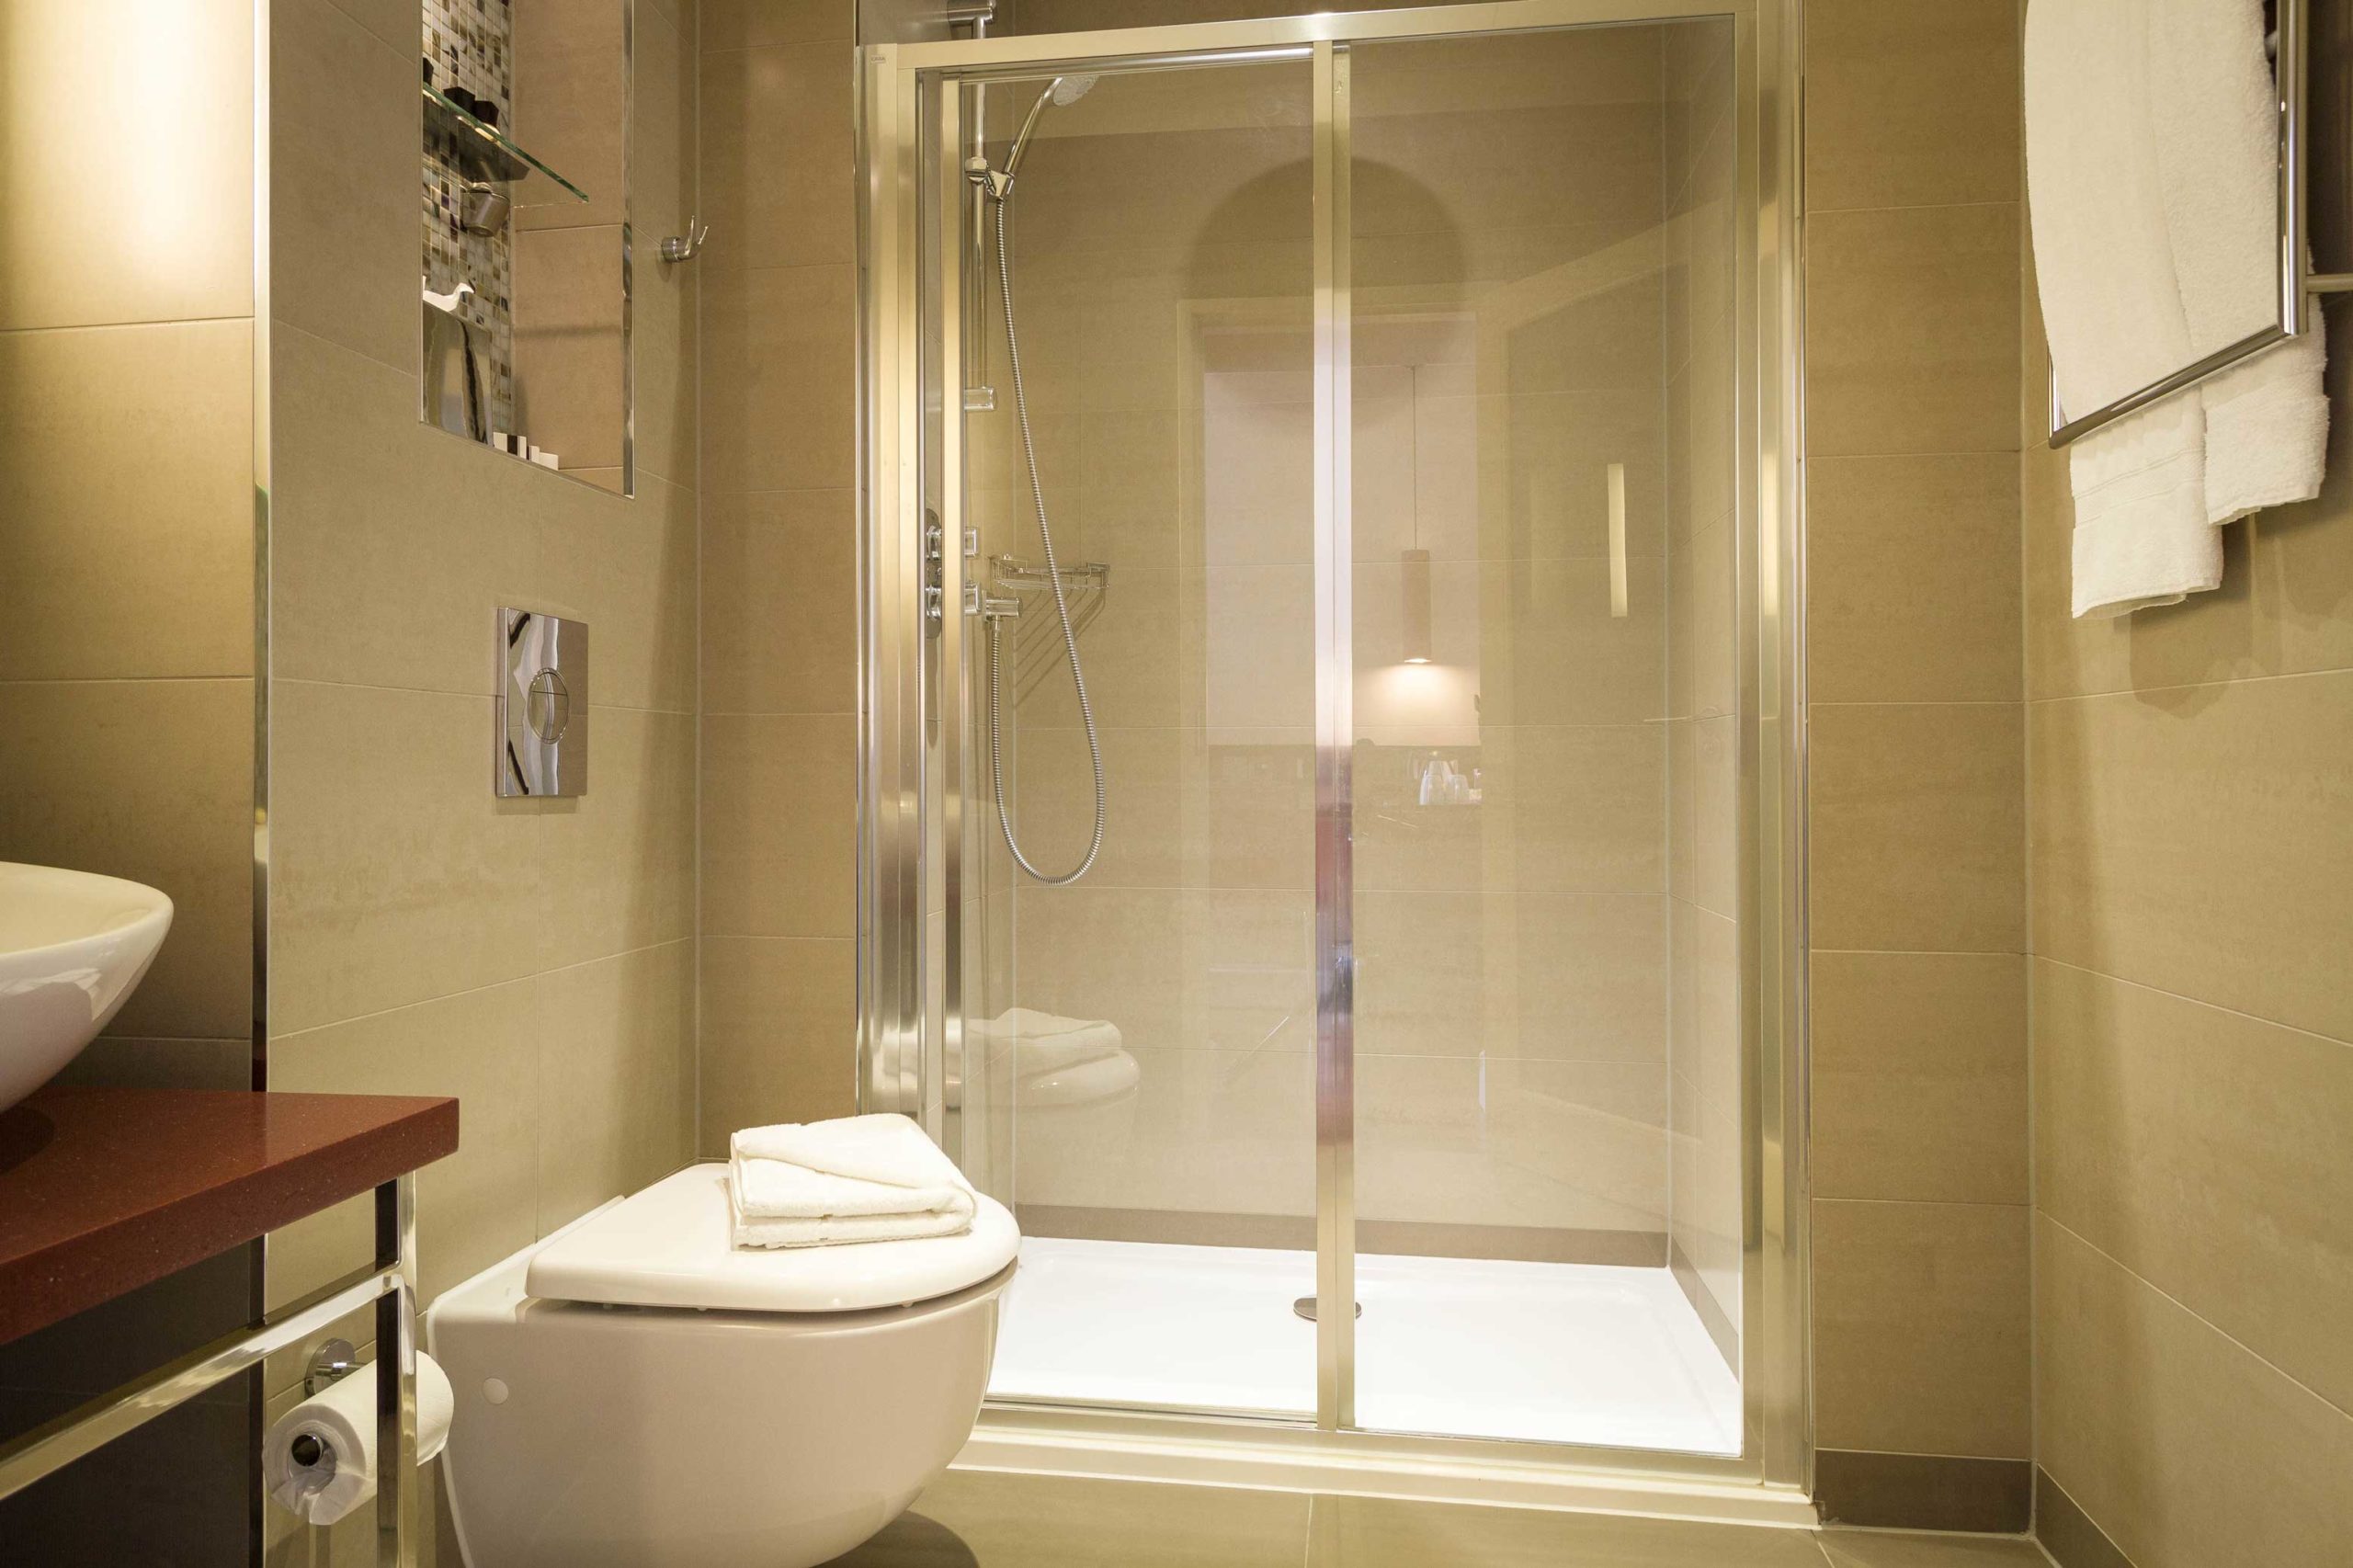 A toilet, shower and towel rack with white towels